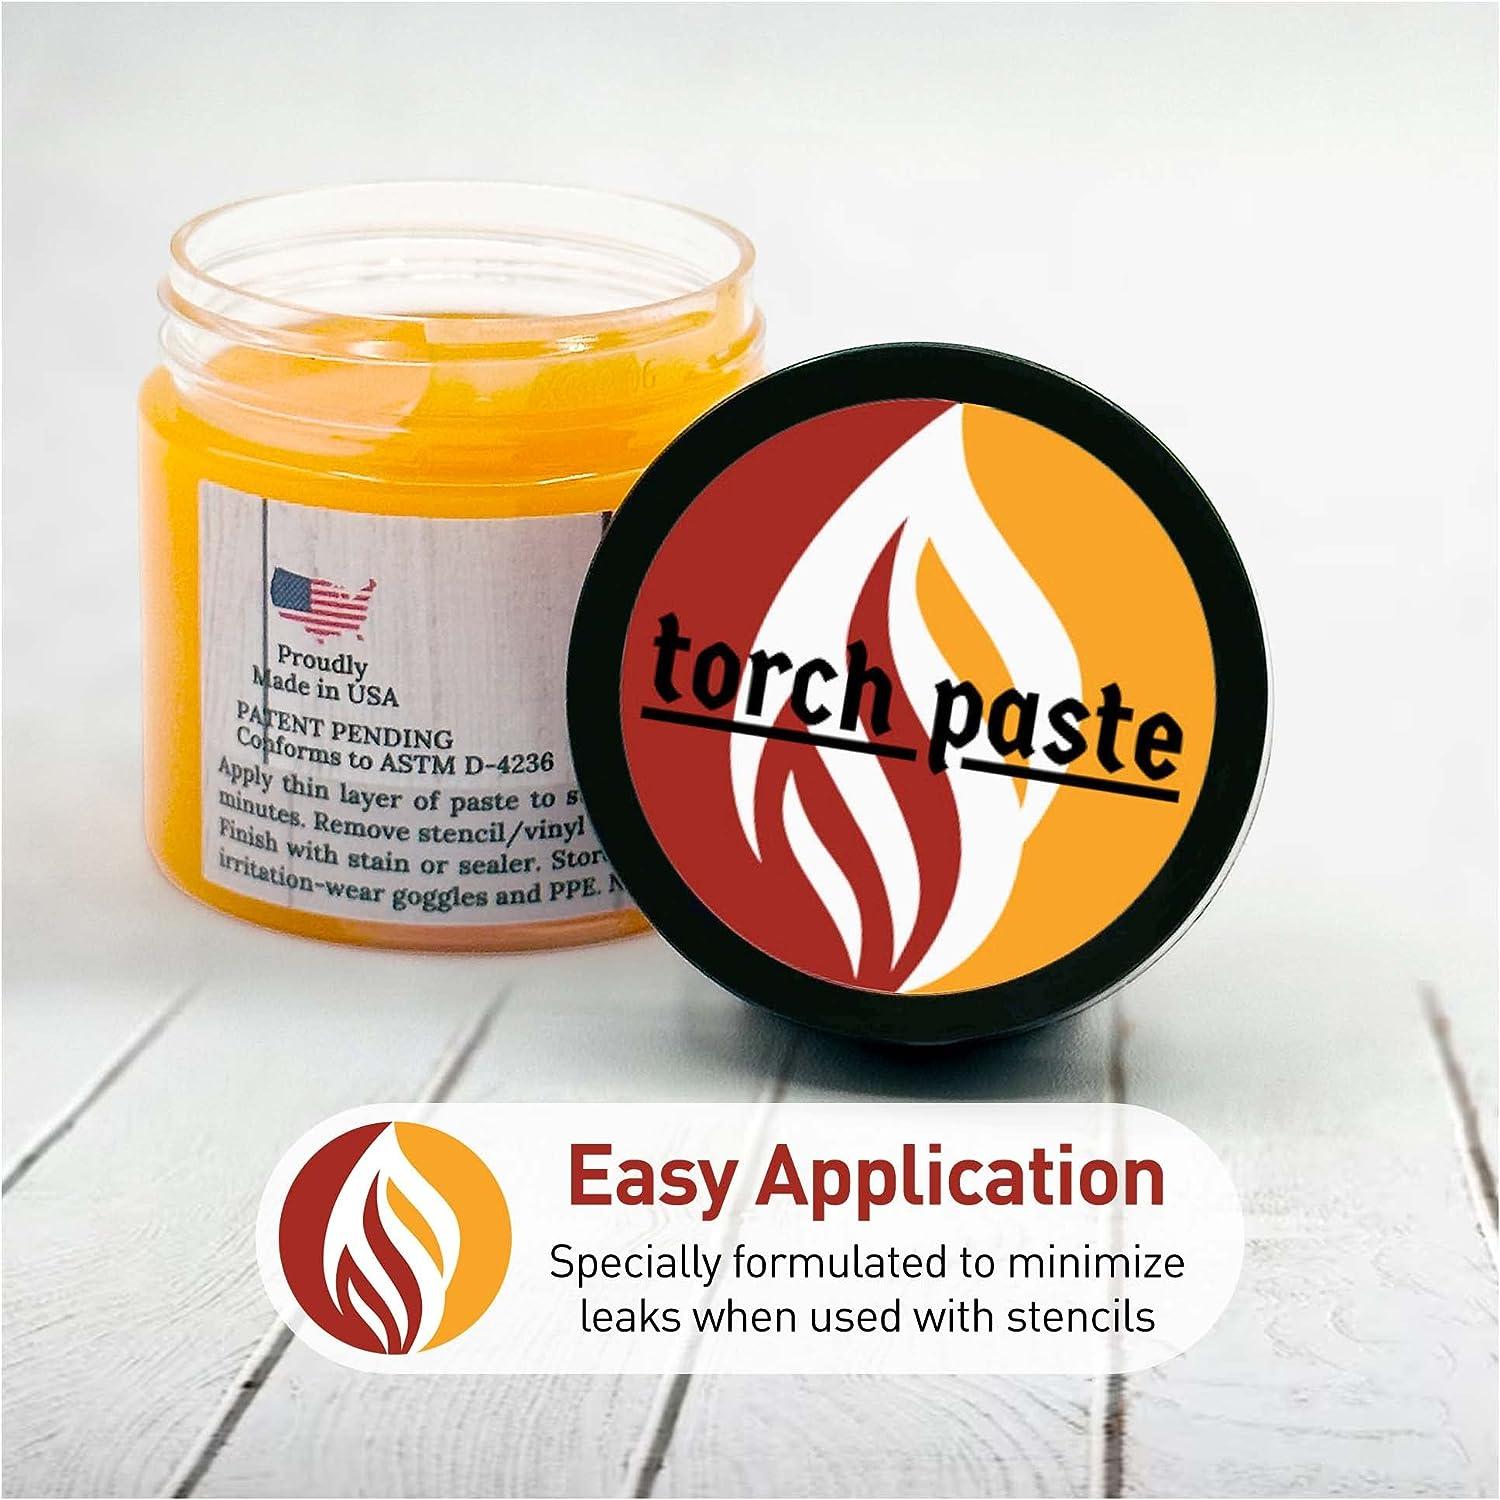  Torch Paste - The Original Wood Burning Paste, Made in USA  Heat Activated Non-Toxic Paste for Crafting